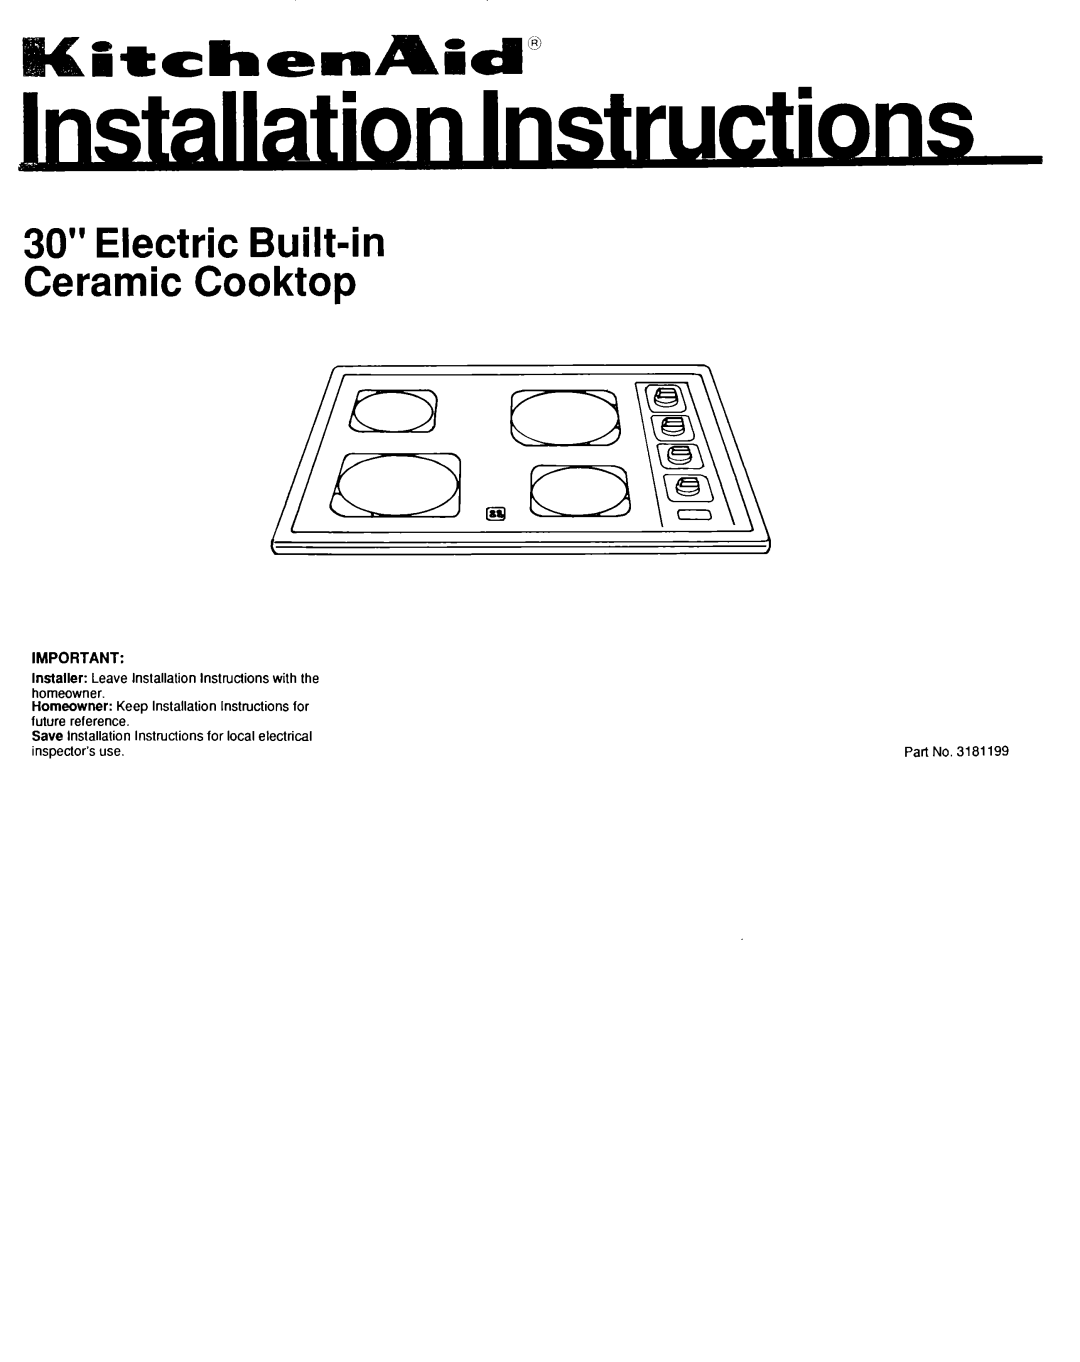 KitchenAid 3181199 installation instructions Installer Leave lnstallalion Instructions with the, homeowner 